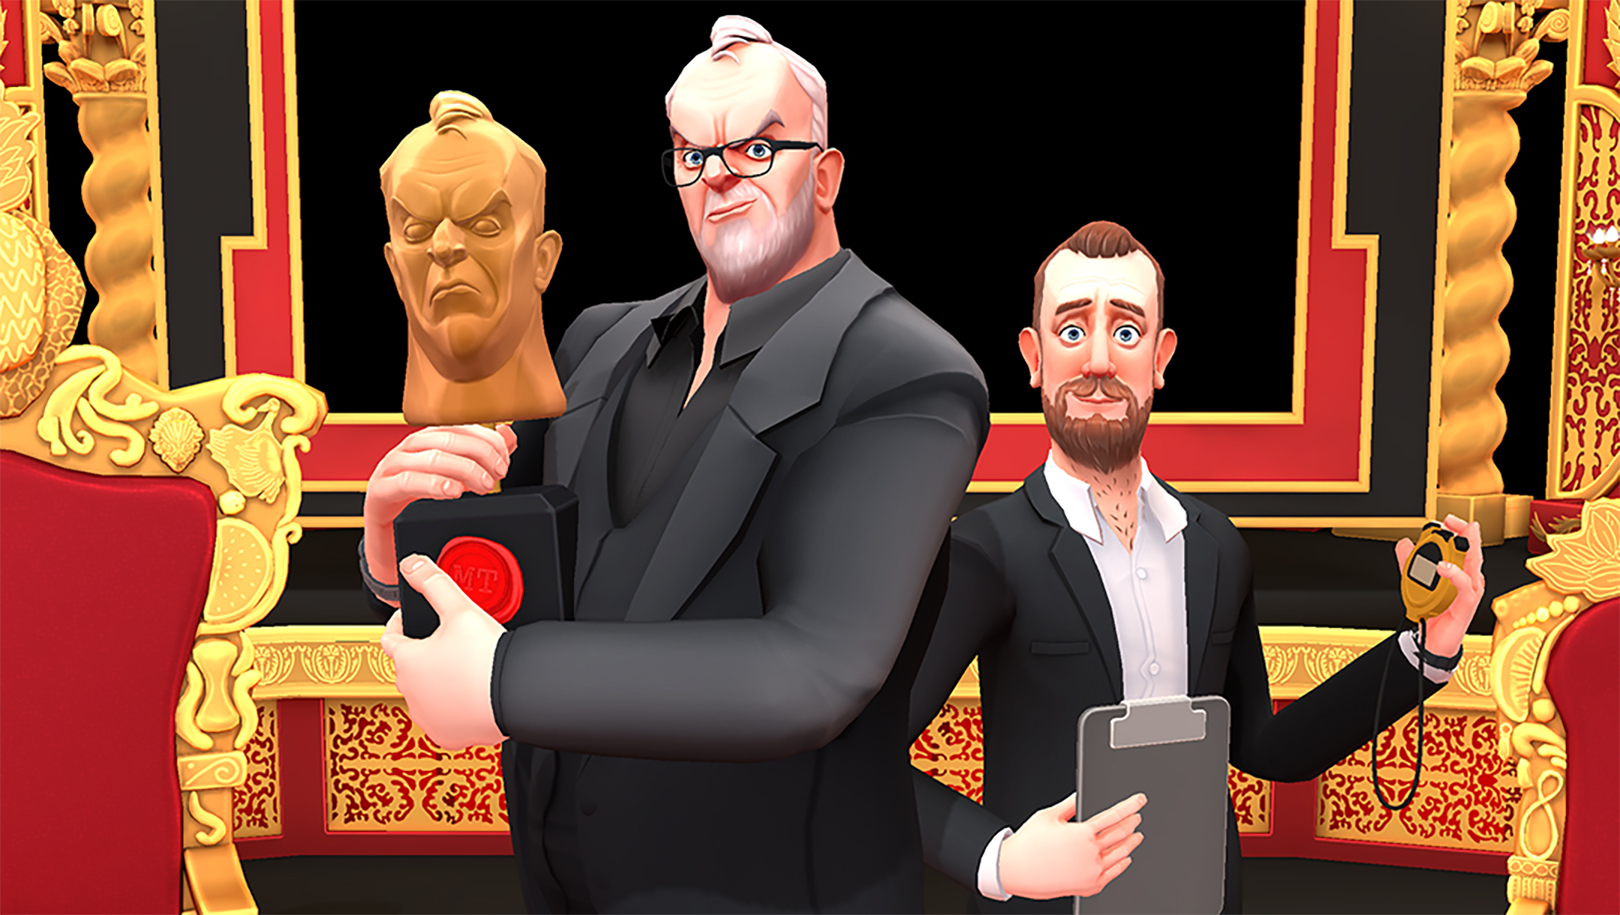 The Taskmaster VR game is out in a few weeks, and Little Alex Horne is resigned to what his avatar can expect from you sickos: ‘They will definitely do things to me’